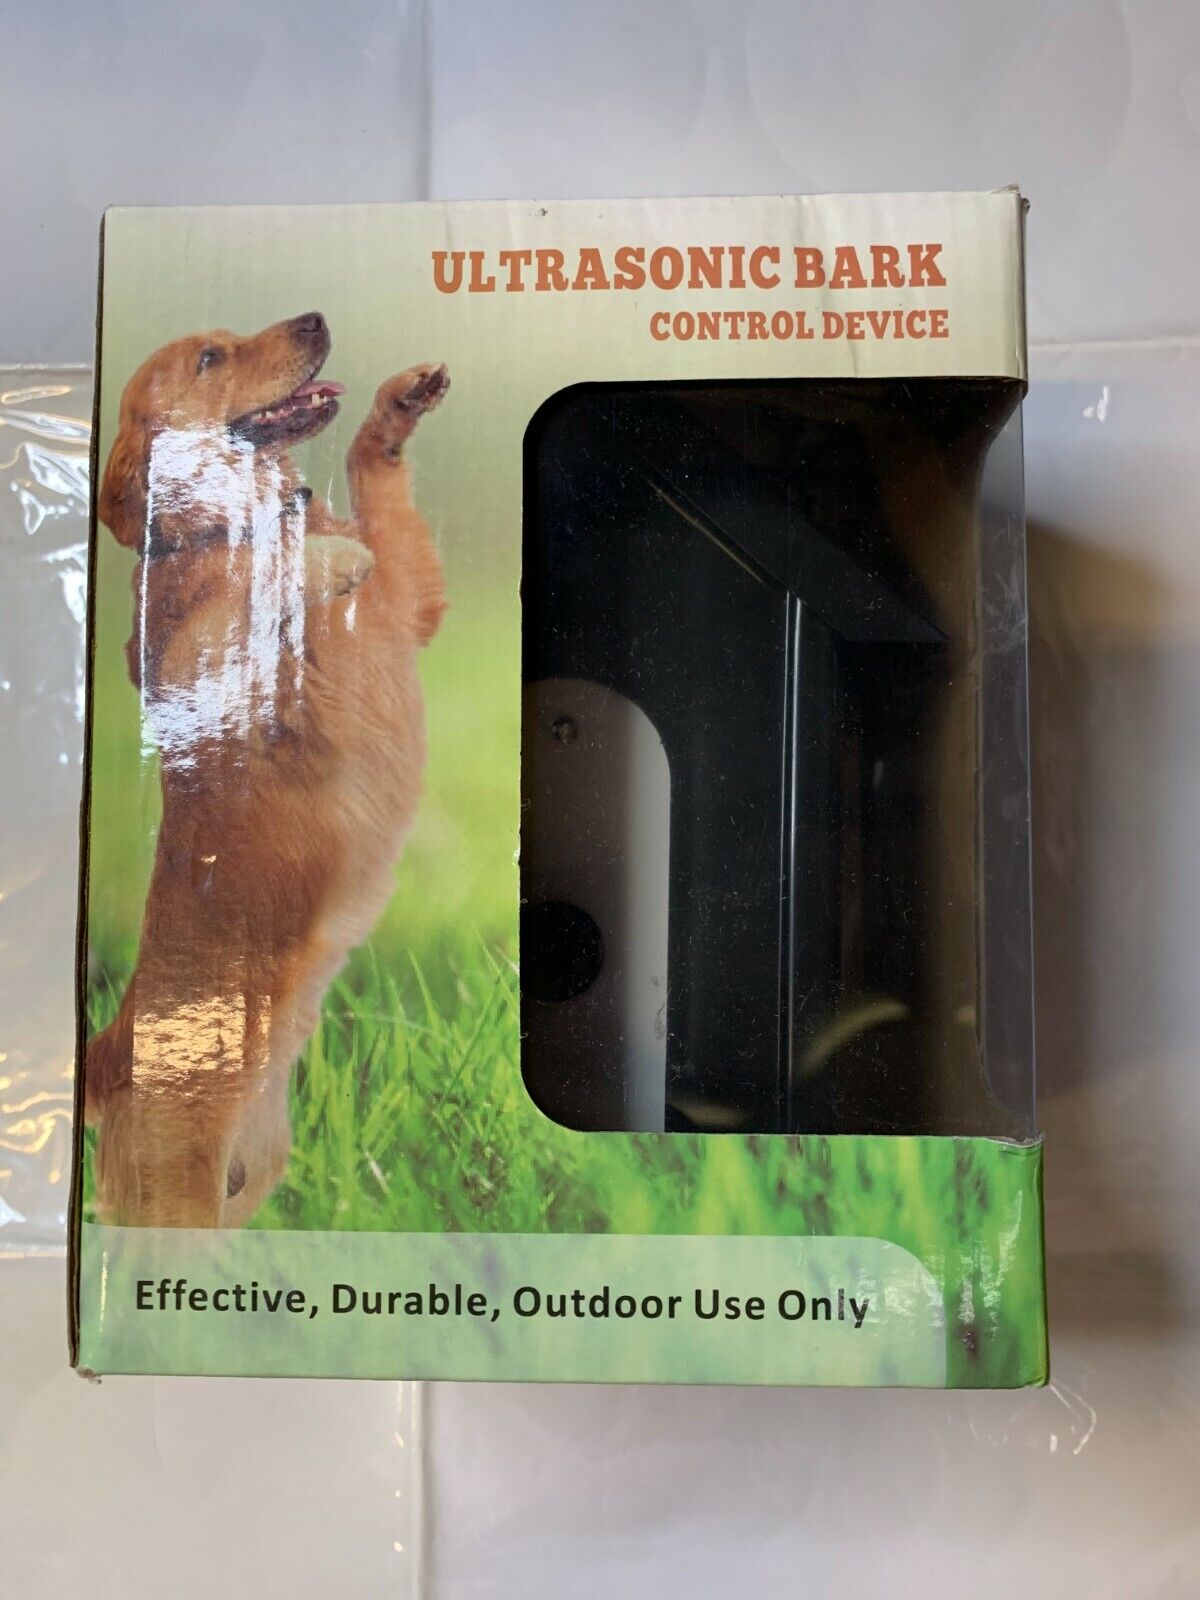 Ultrasonic bark control device efective durable Ranking Popular standard TOP13 only use outdoor